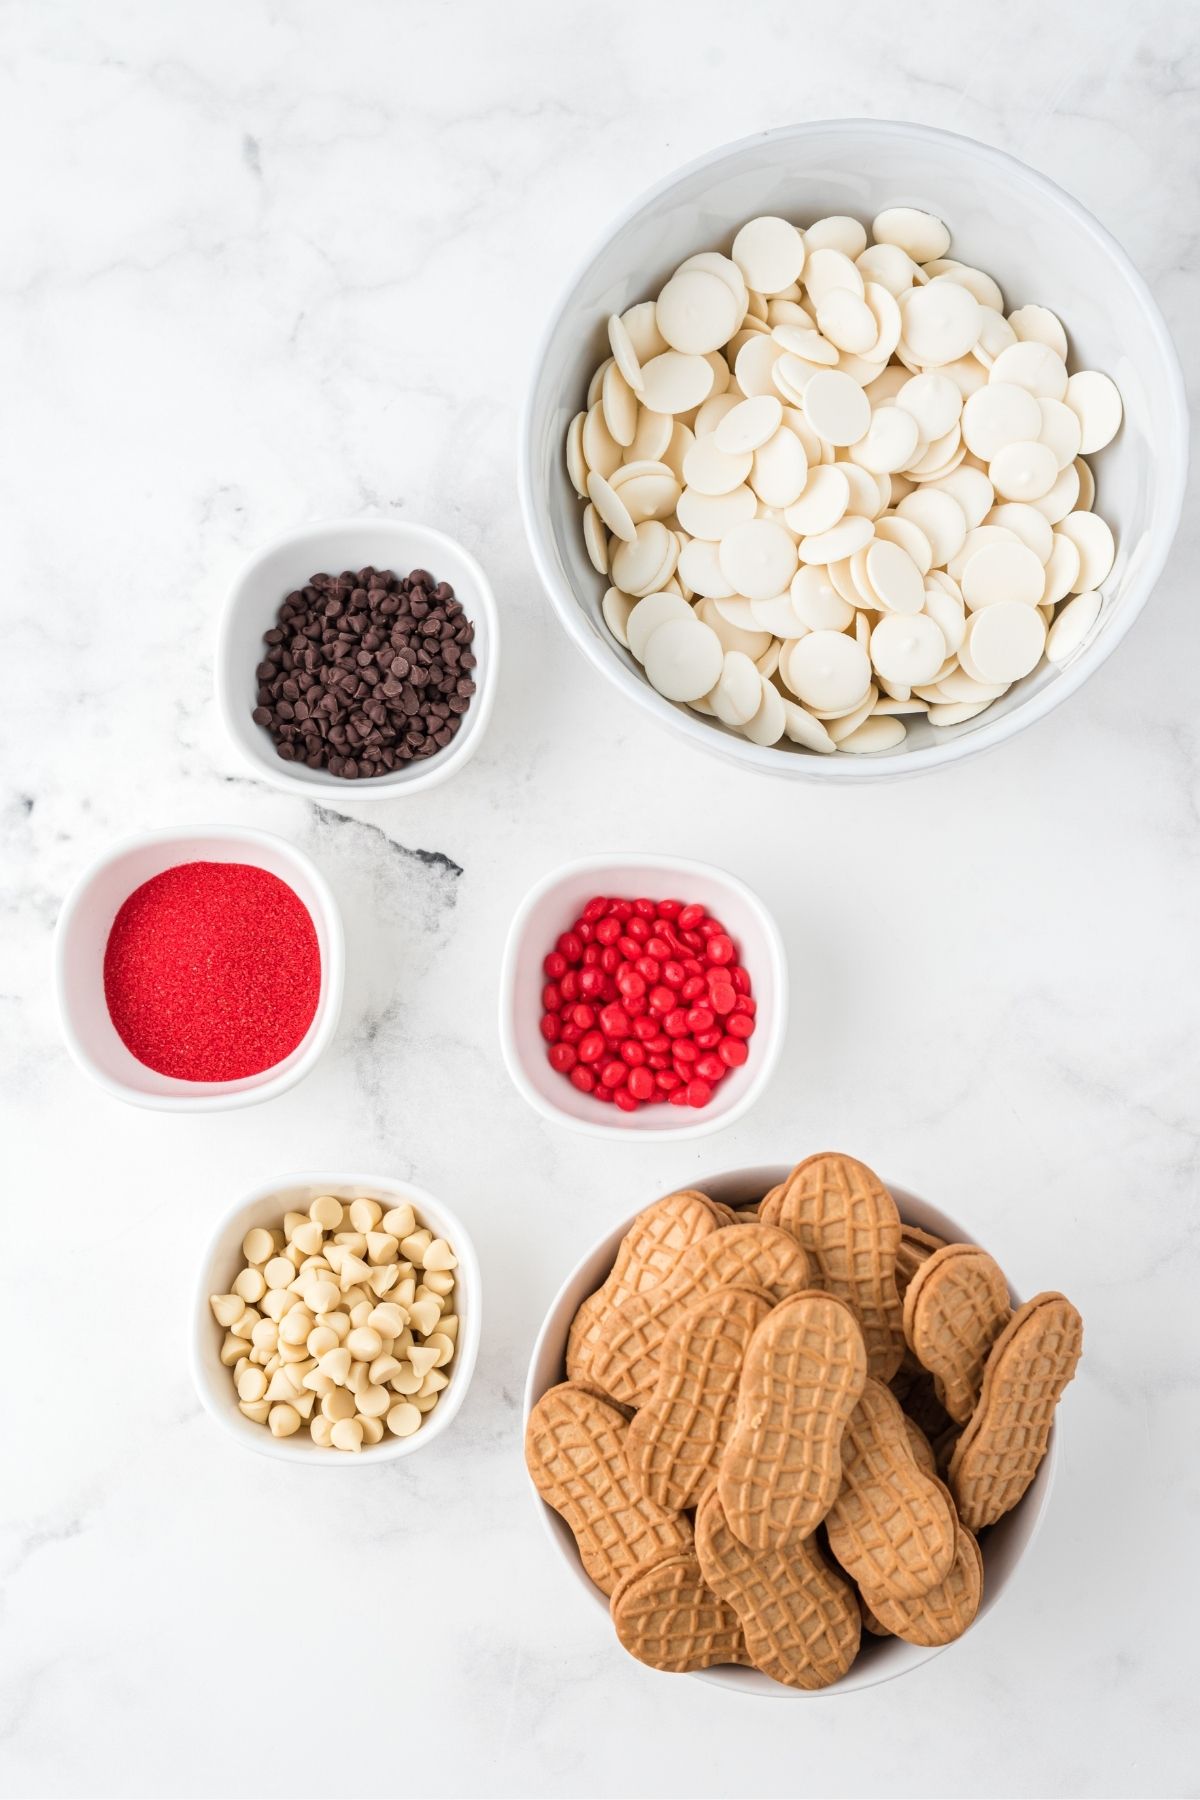 ingredients on white counter: white candy melts, mini chocolate chips, red hot candies, red sanding sugar, Nutter Butter cookies